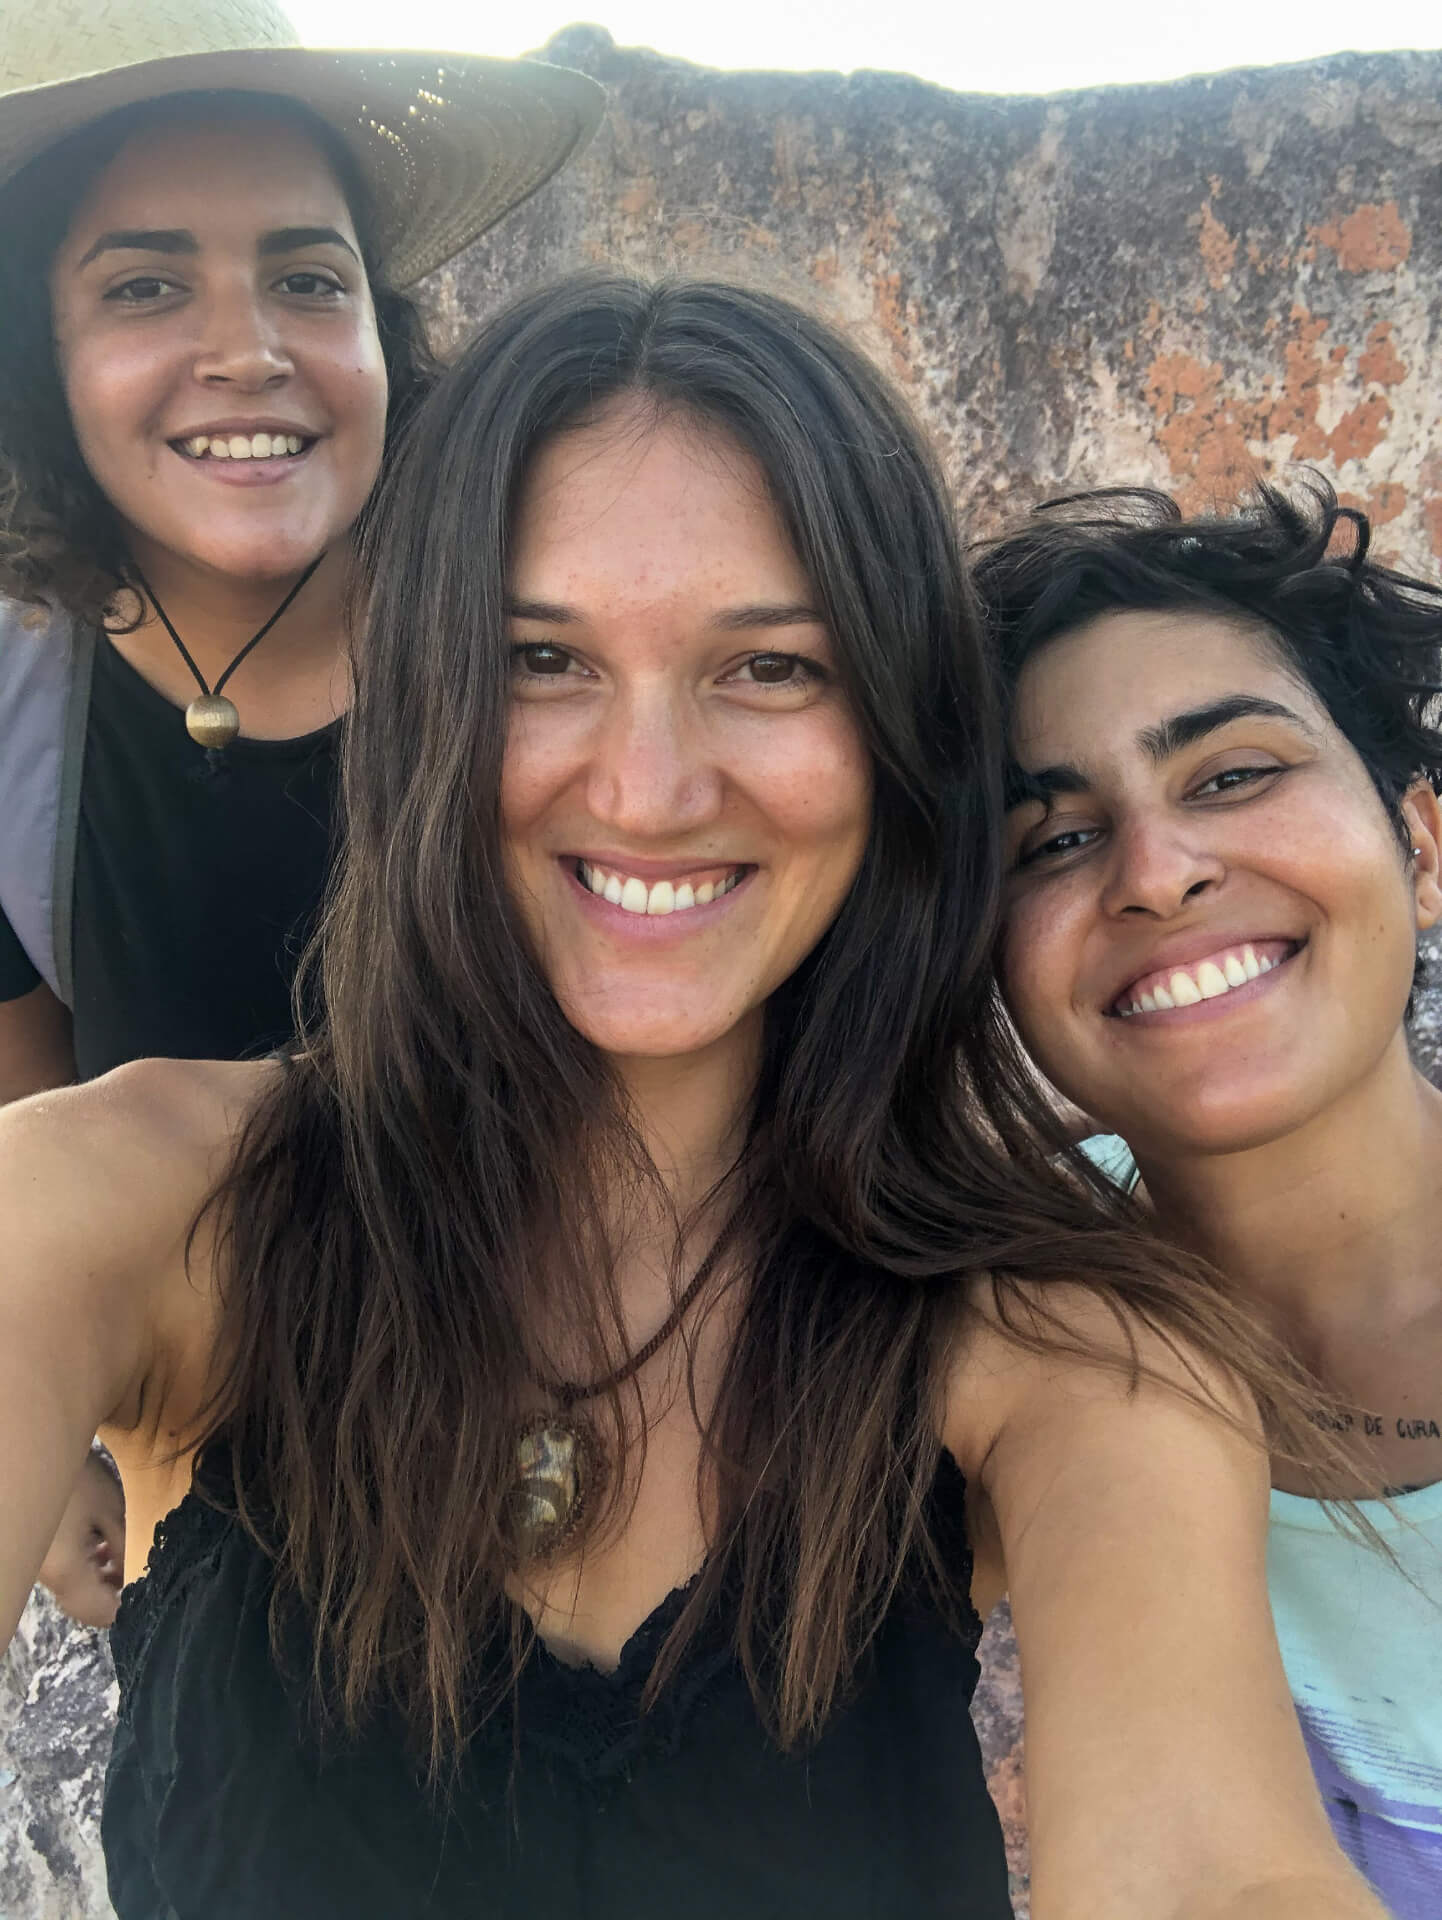 Helene Dotsch, Céu Albuquerque and her partner taking a smiling selfie after a photo shoot in Brazil